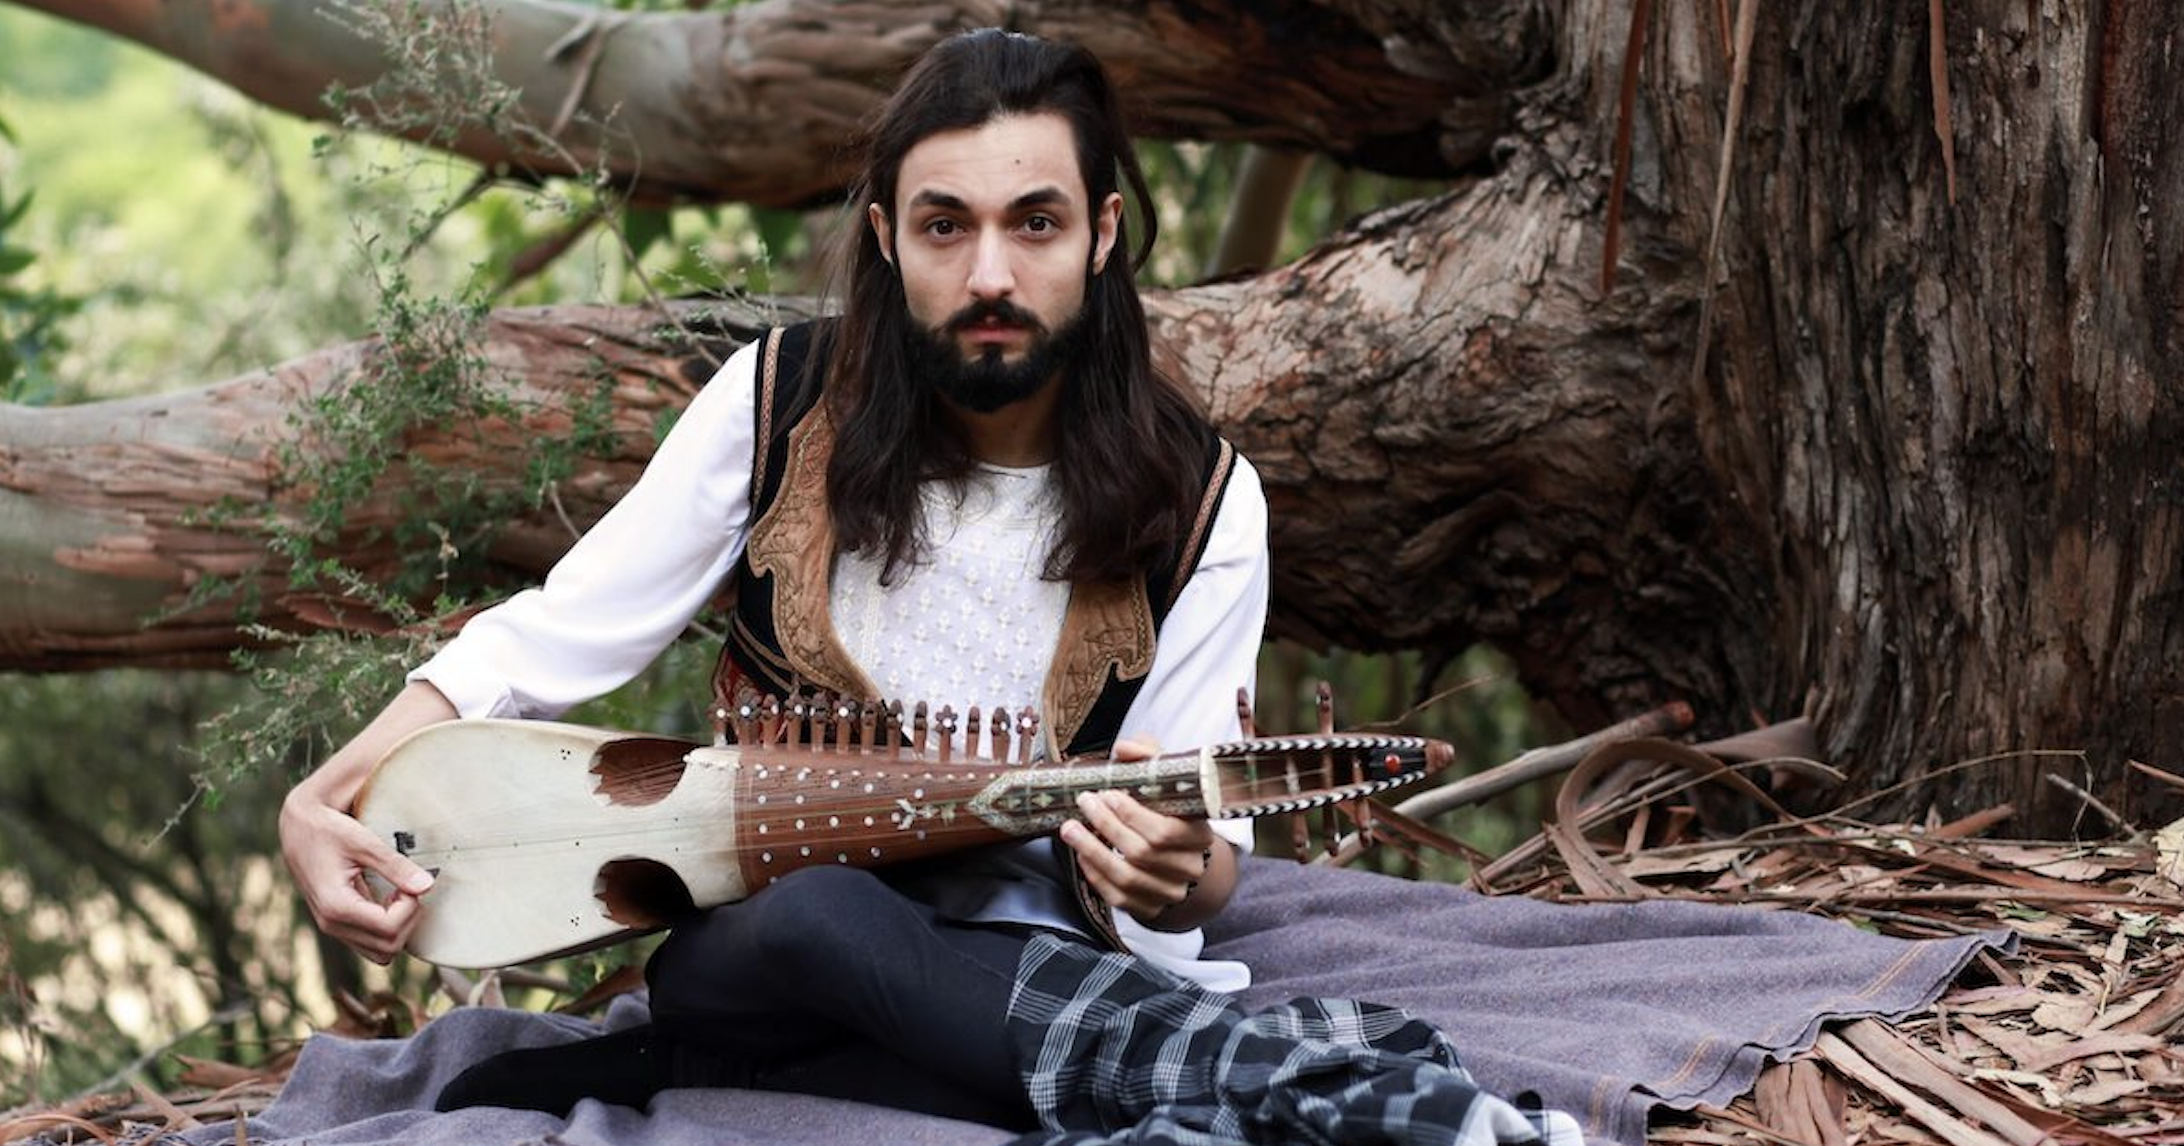 Qais Essar poses with his rabab, seated on a blanked by a tree in the forest